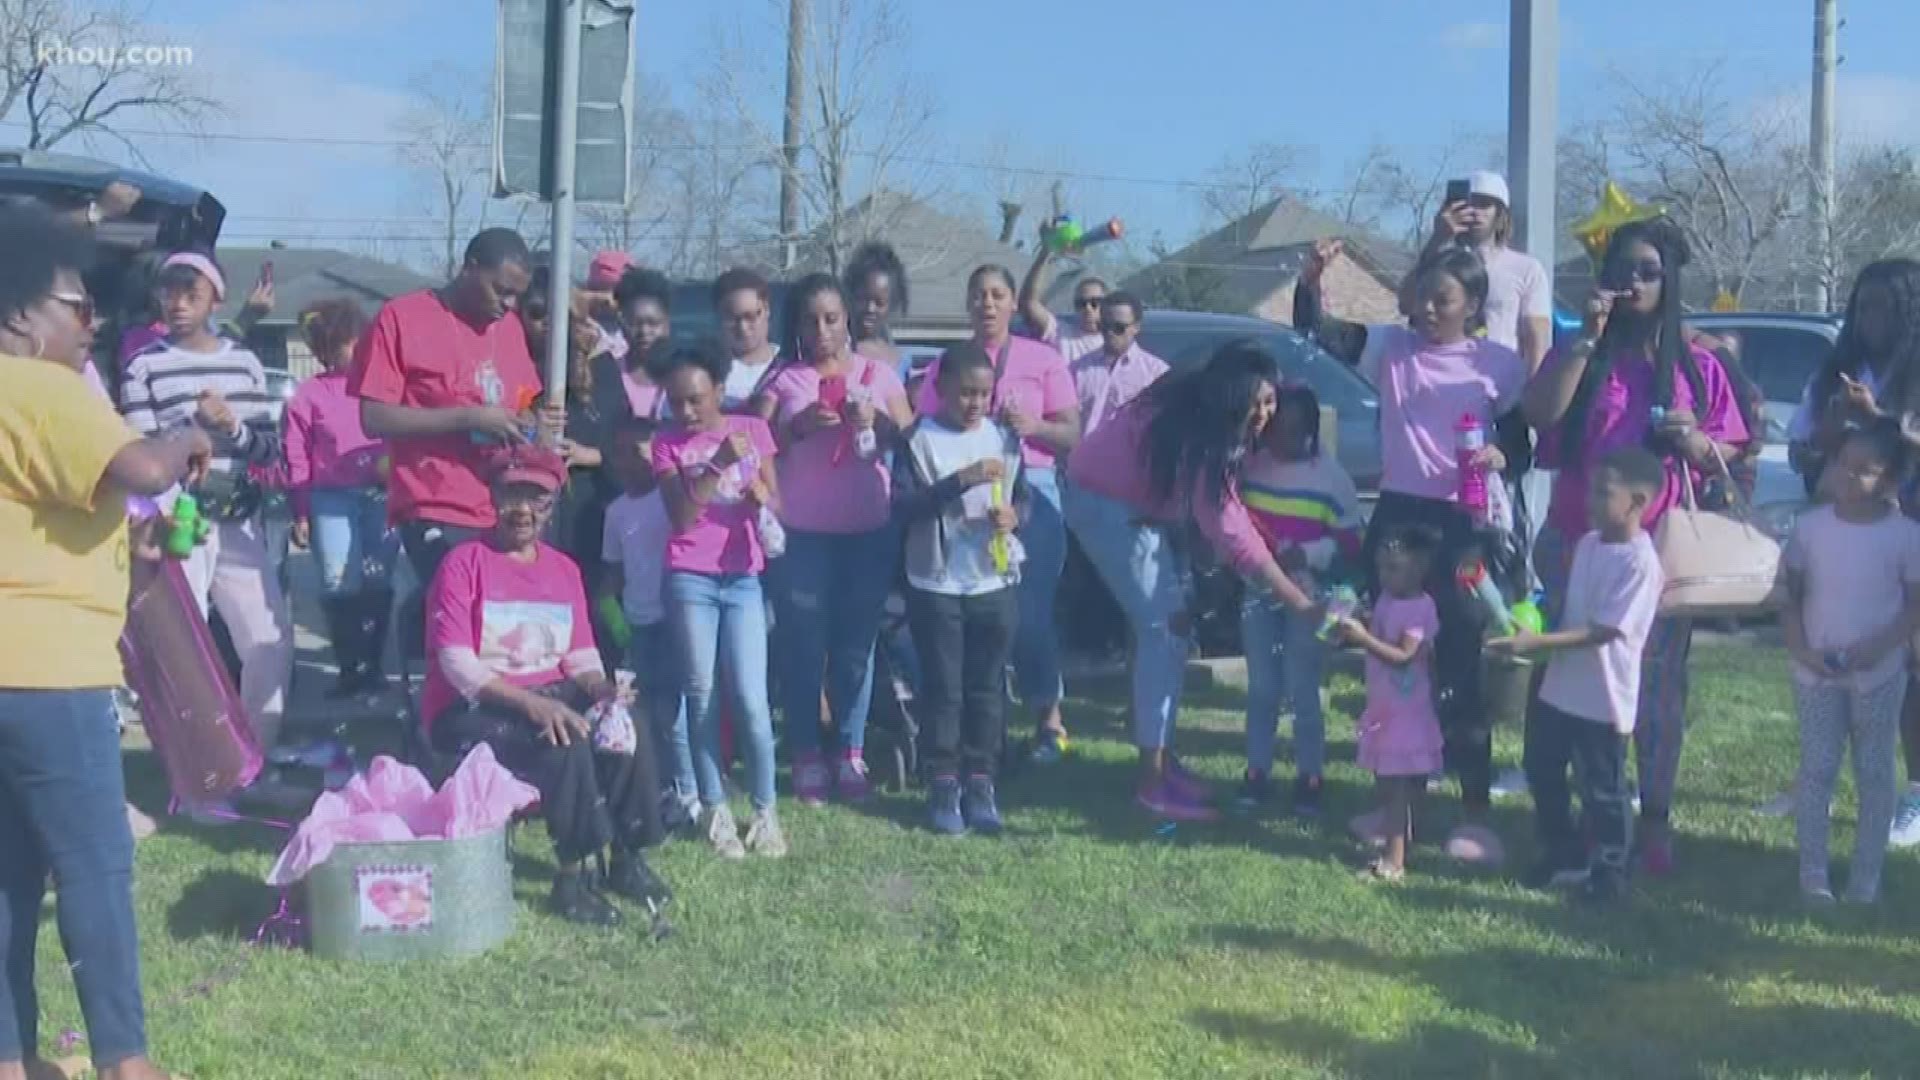 Dozens gathered at Sunnyside Park Saturday afternoon for a birthday party for Maleah Davis.